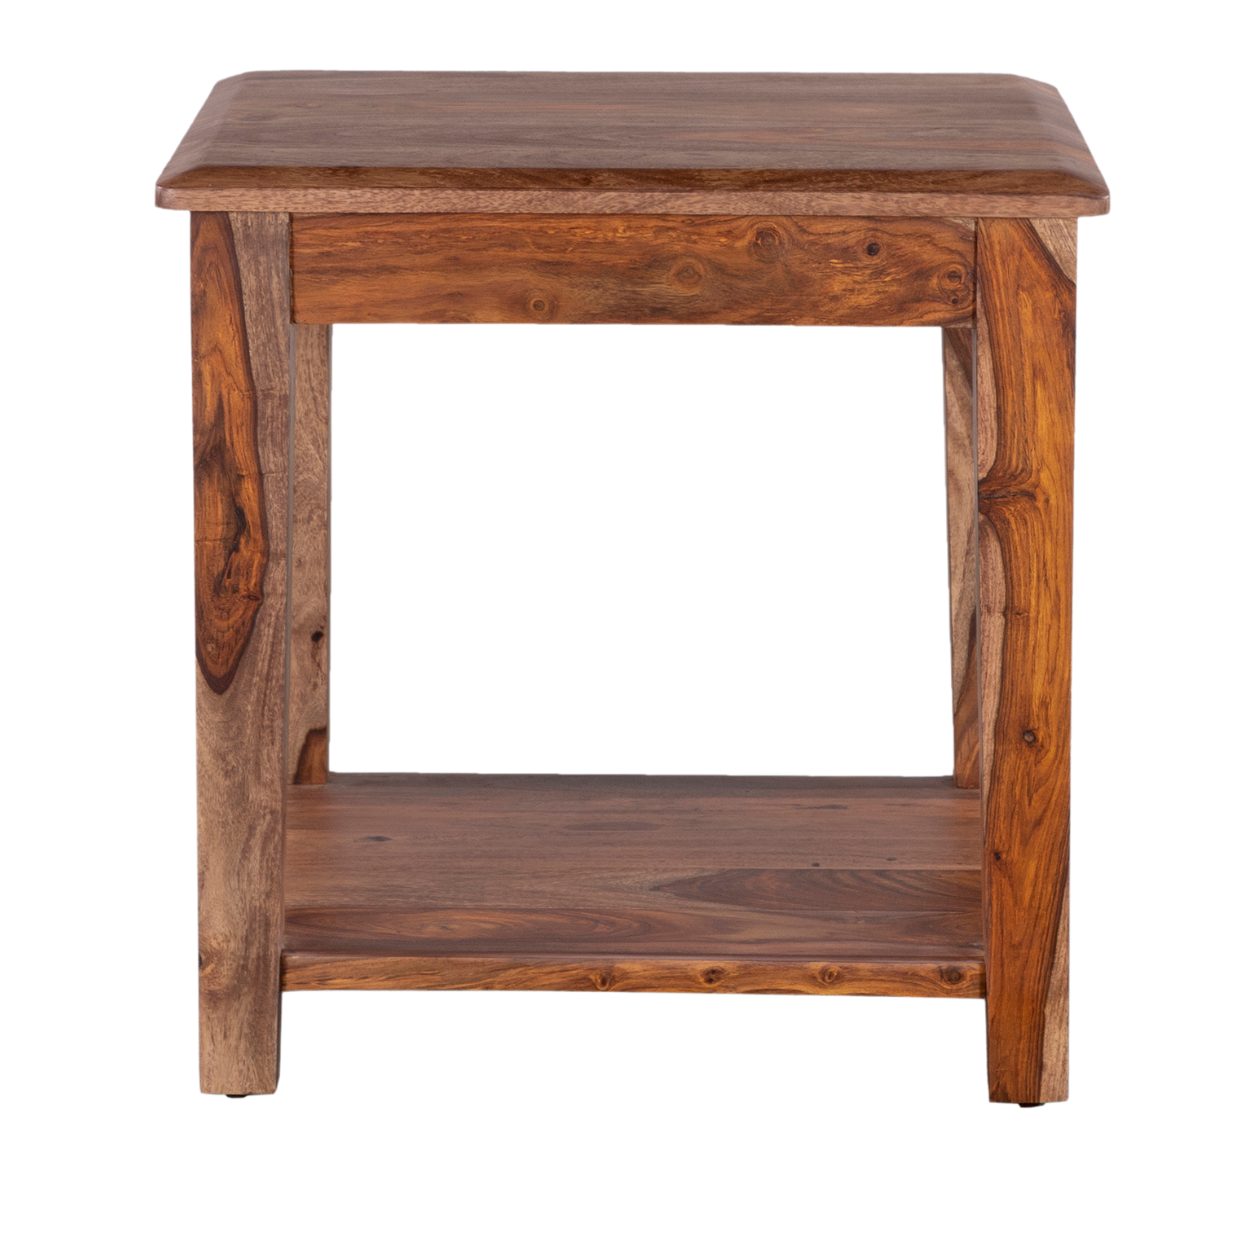 Sonora Harvest End Table